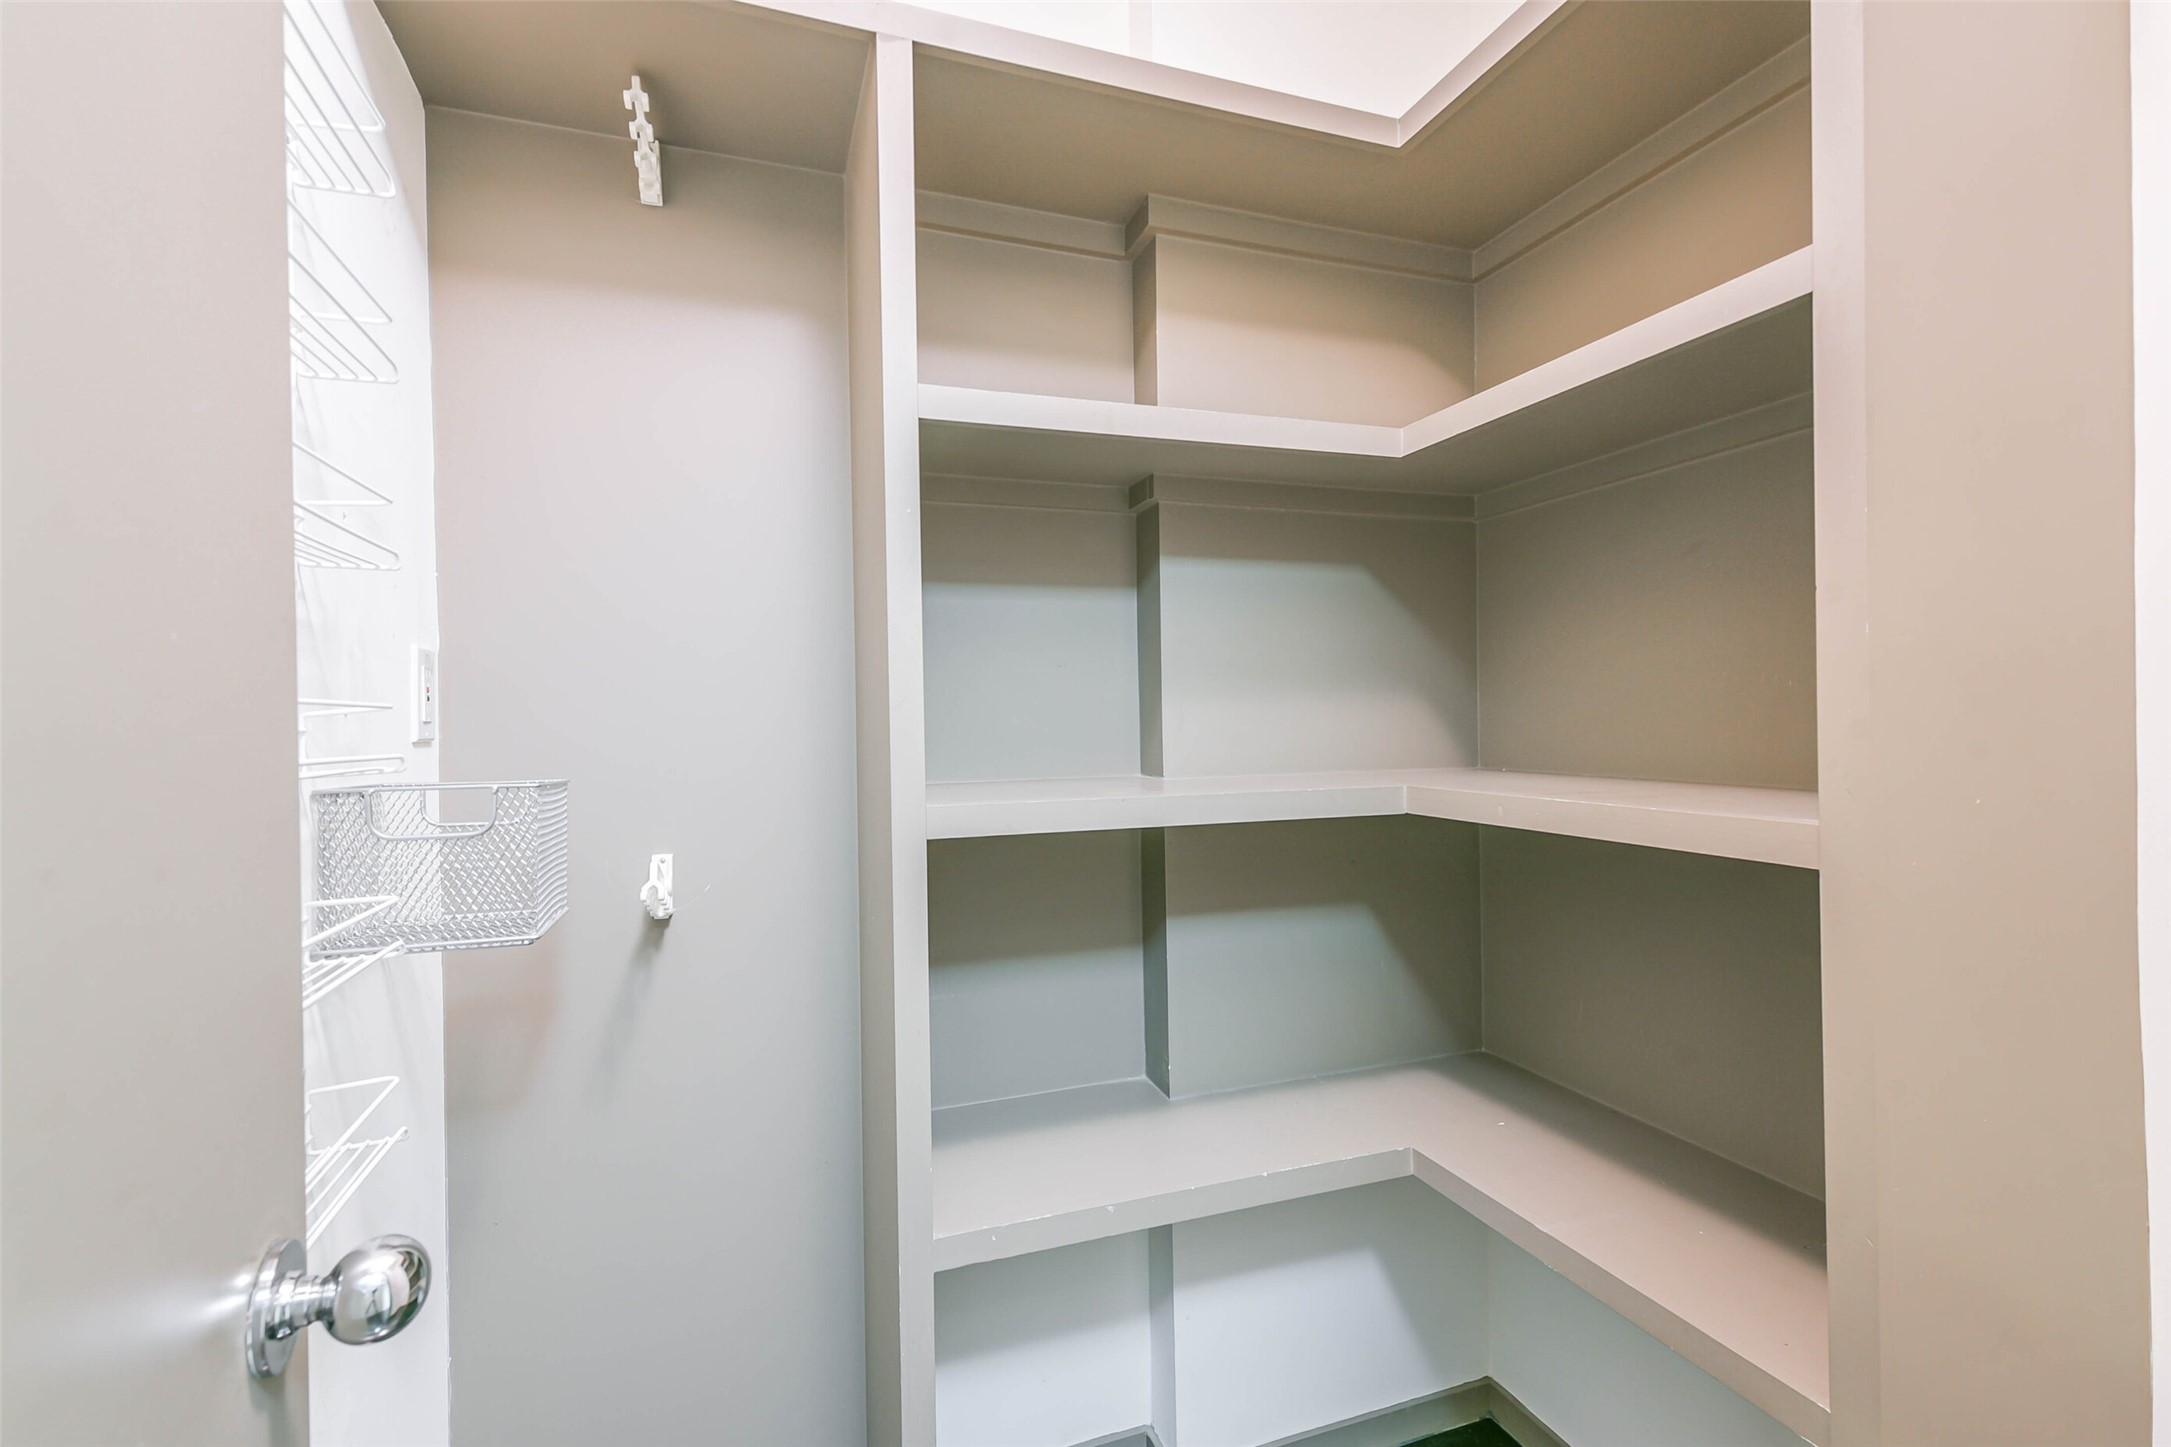 Rare walk-in pantry with custom shelves making it easy to keep organized.